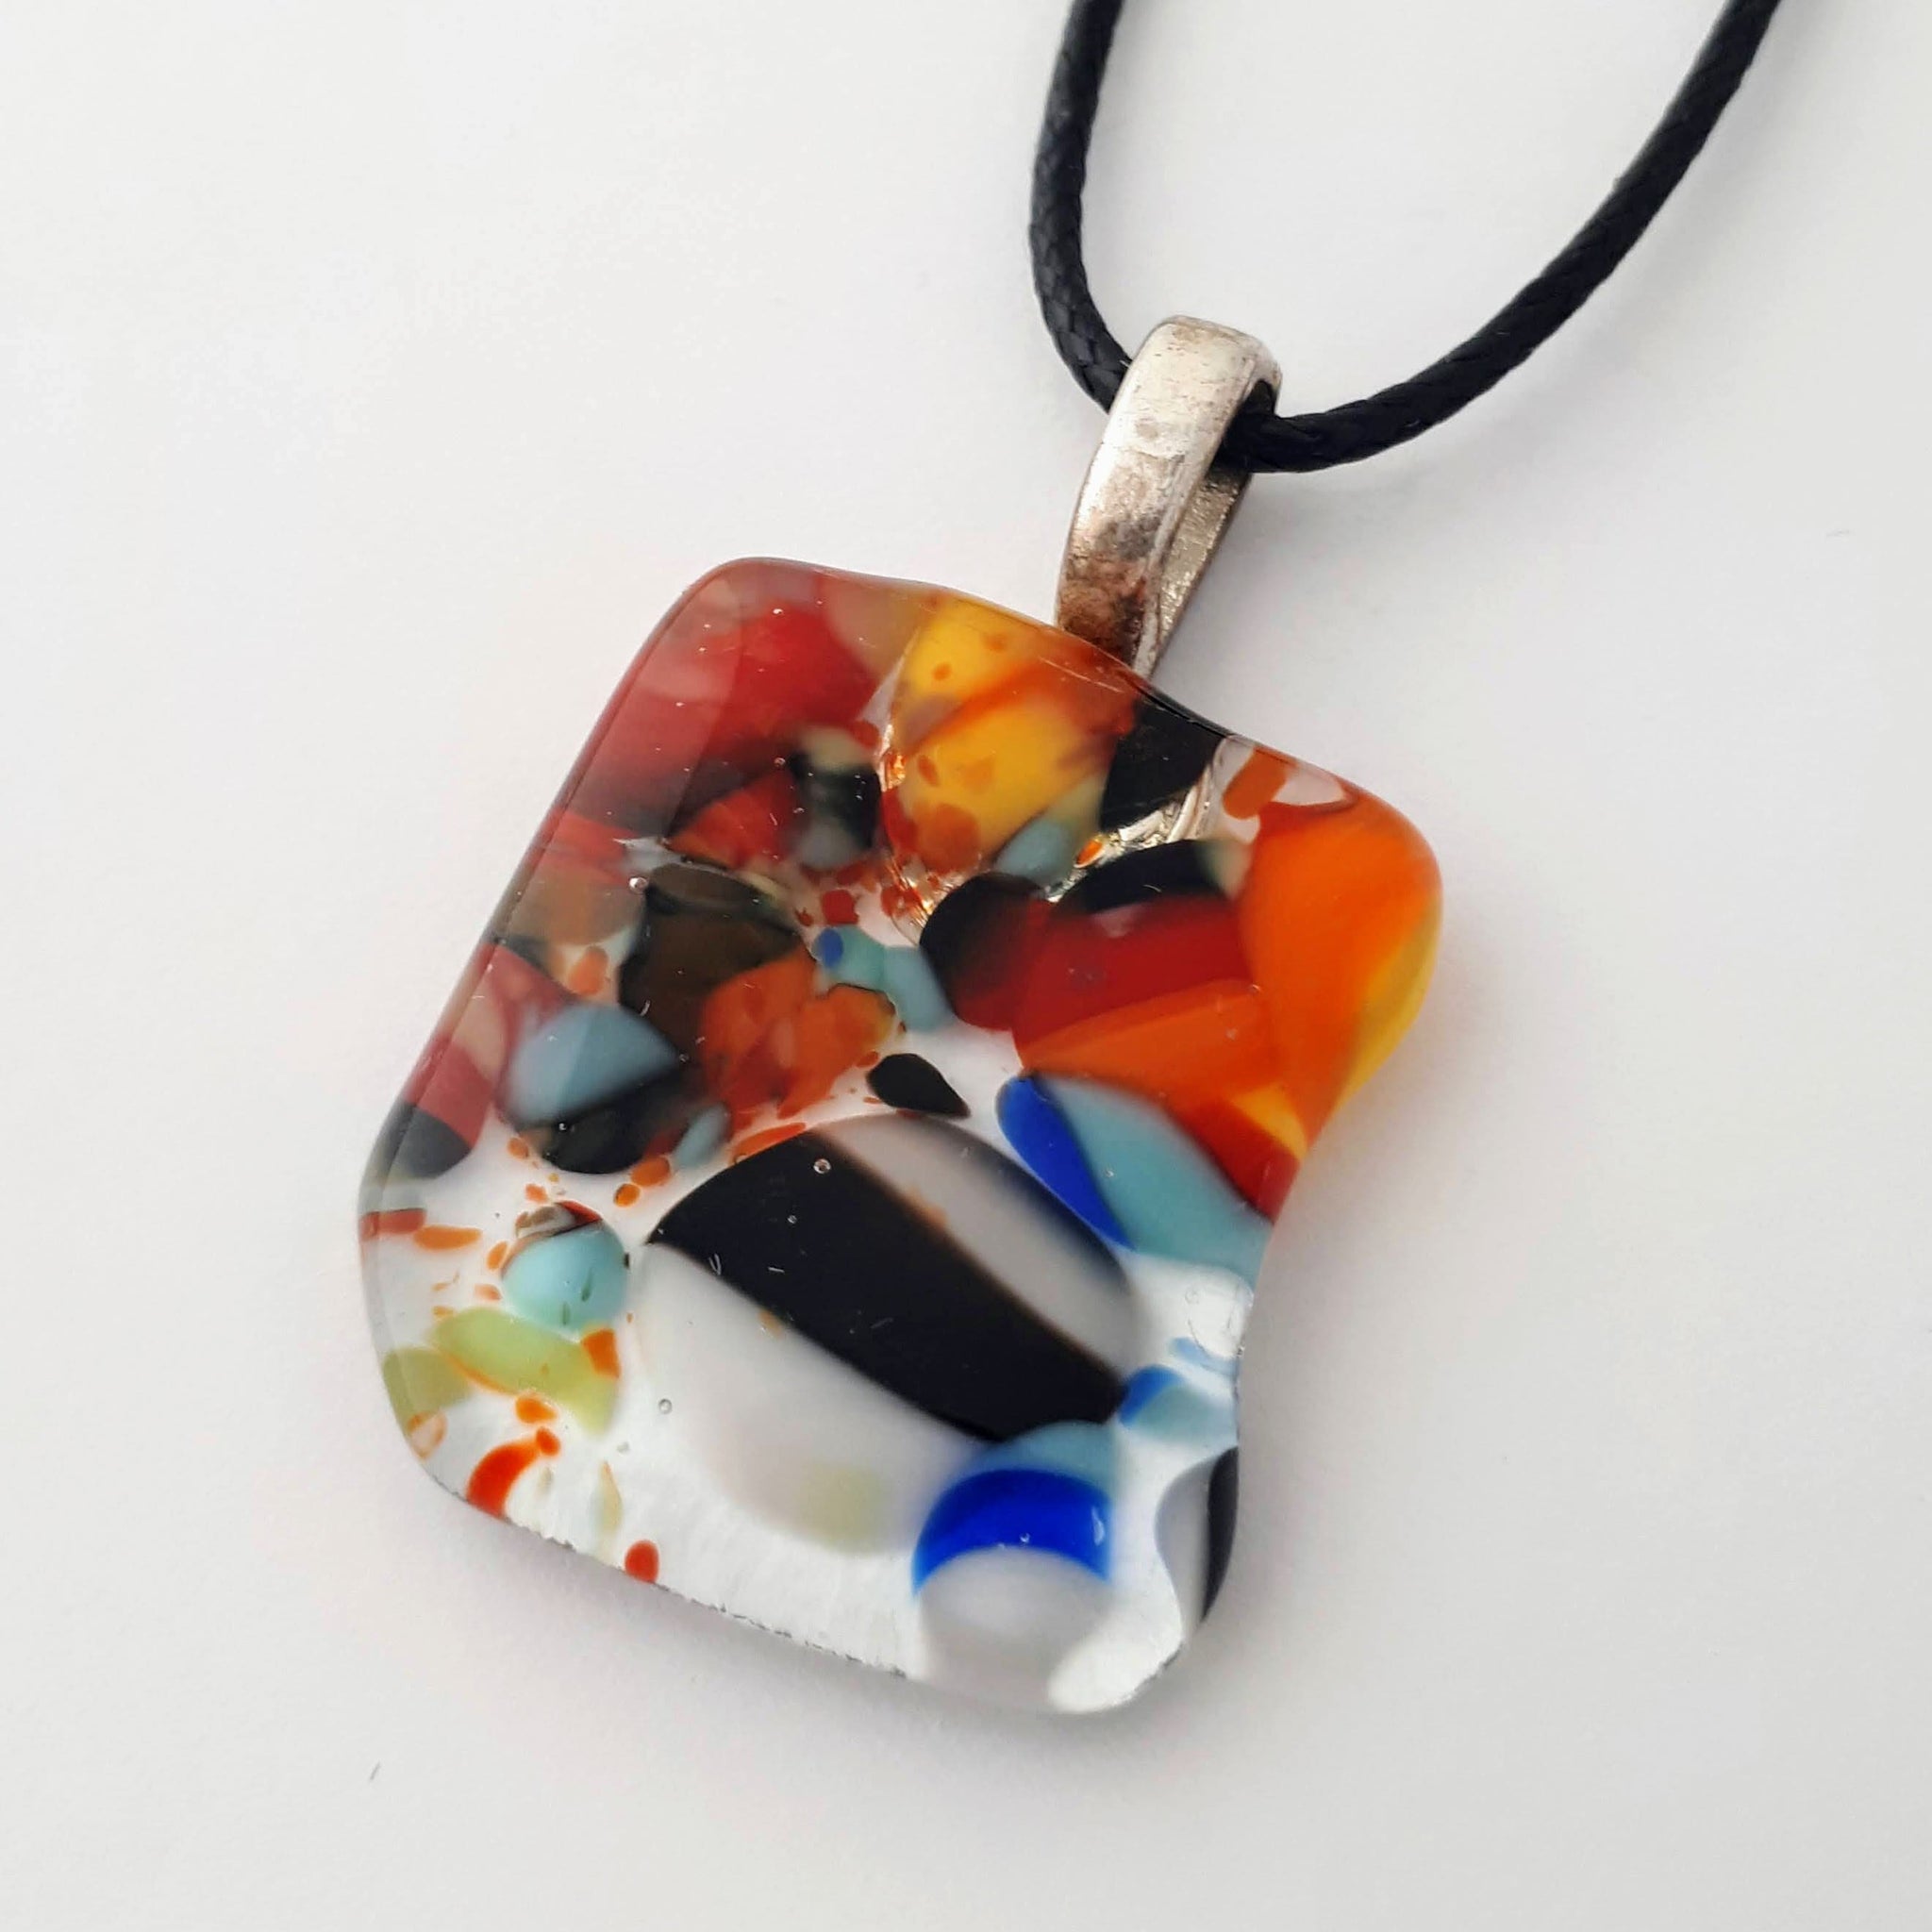 Square-ish glass fused necklace pendant with colourful red, orange, black, white, and bits of blue/green chunks/specs in it, with silver coloured bail and black cord on white background